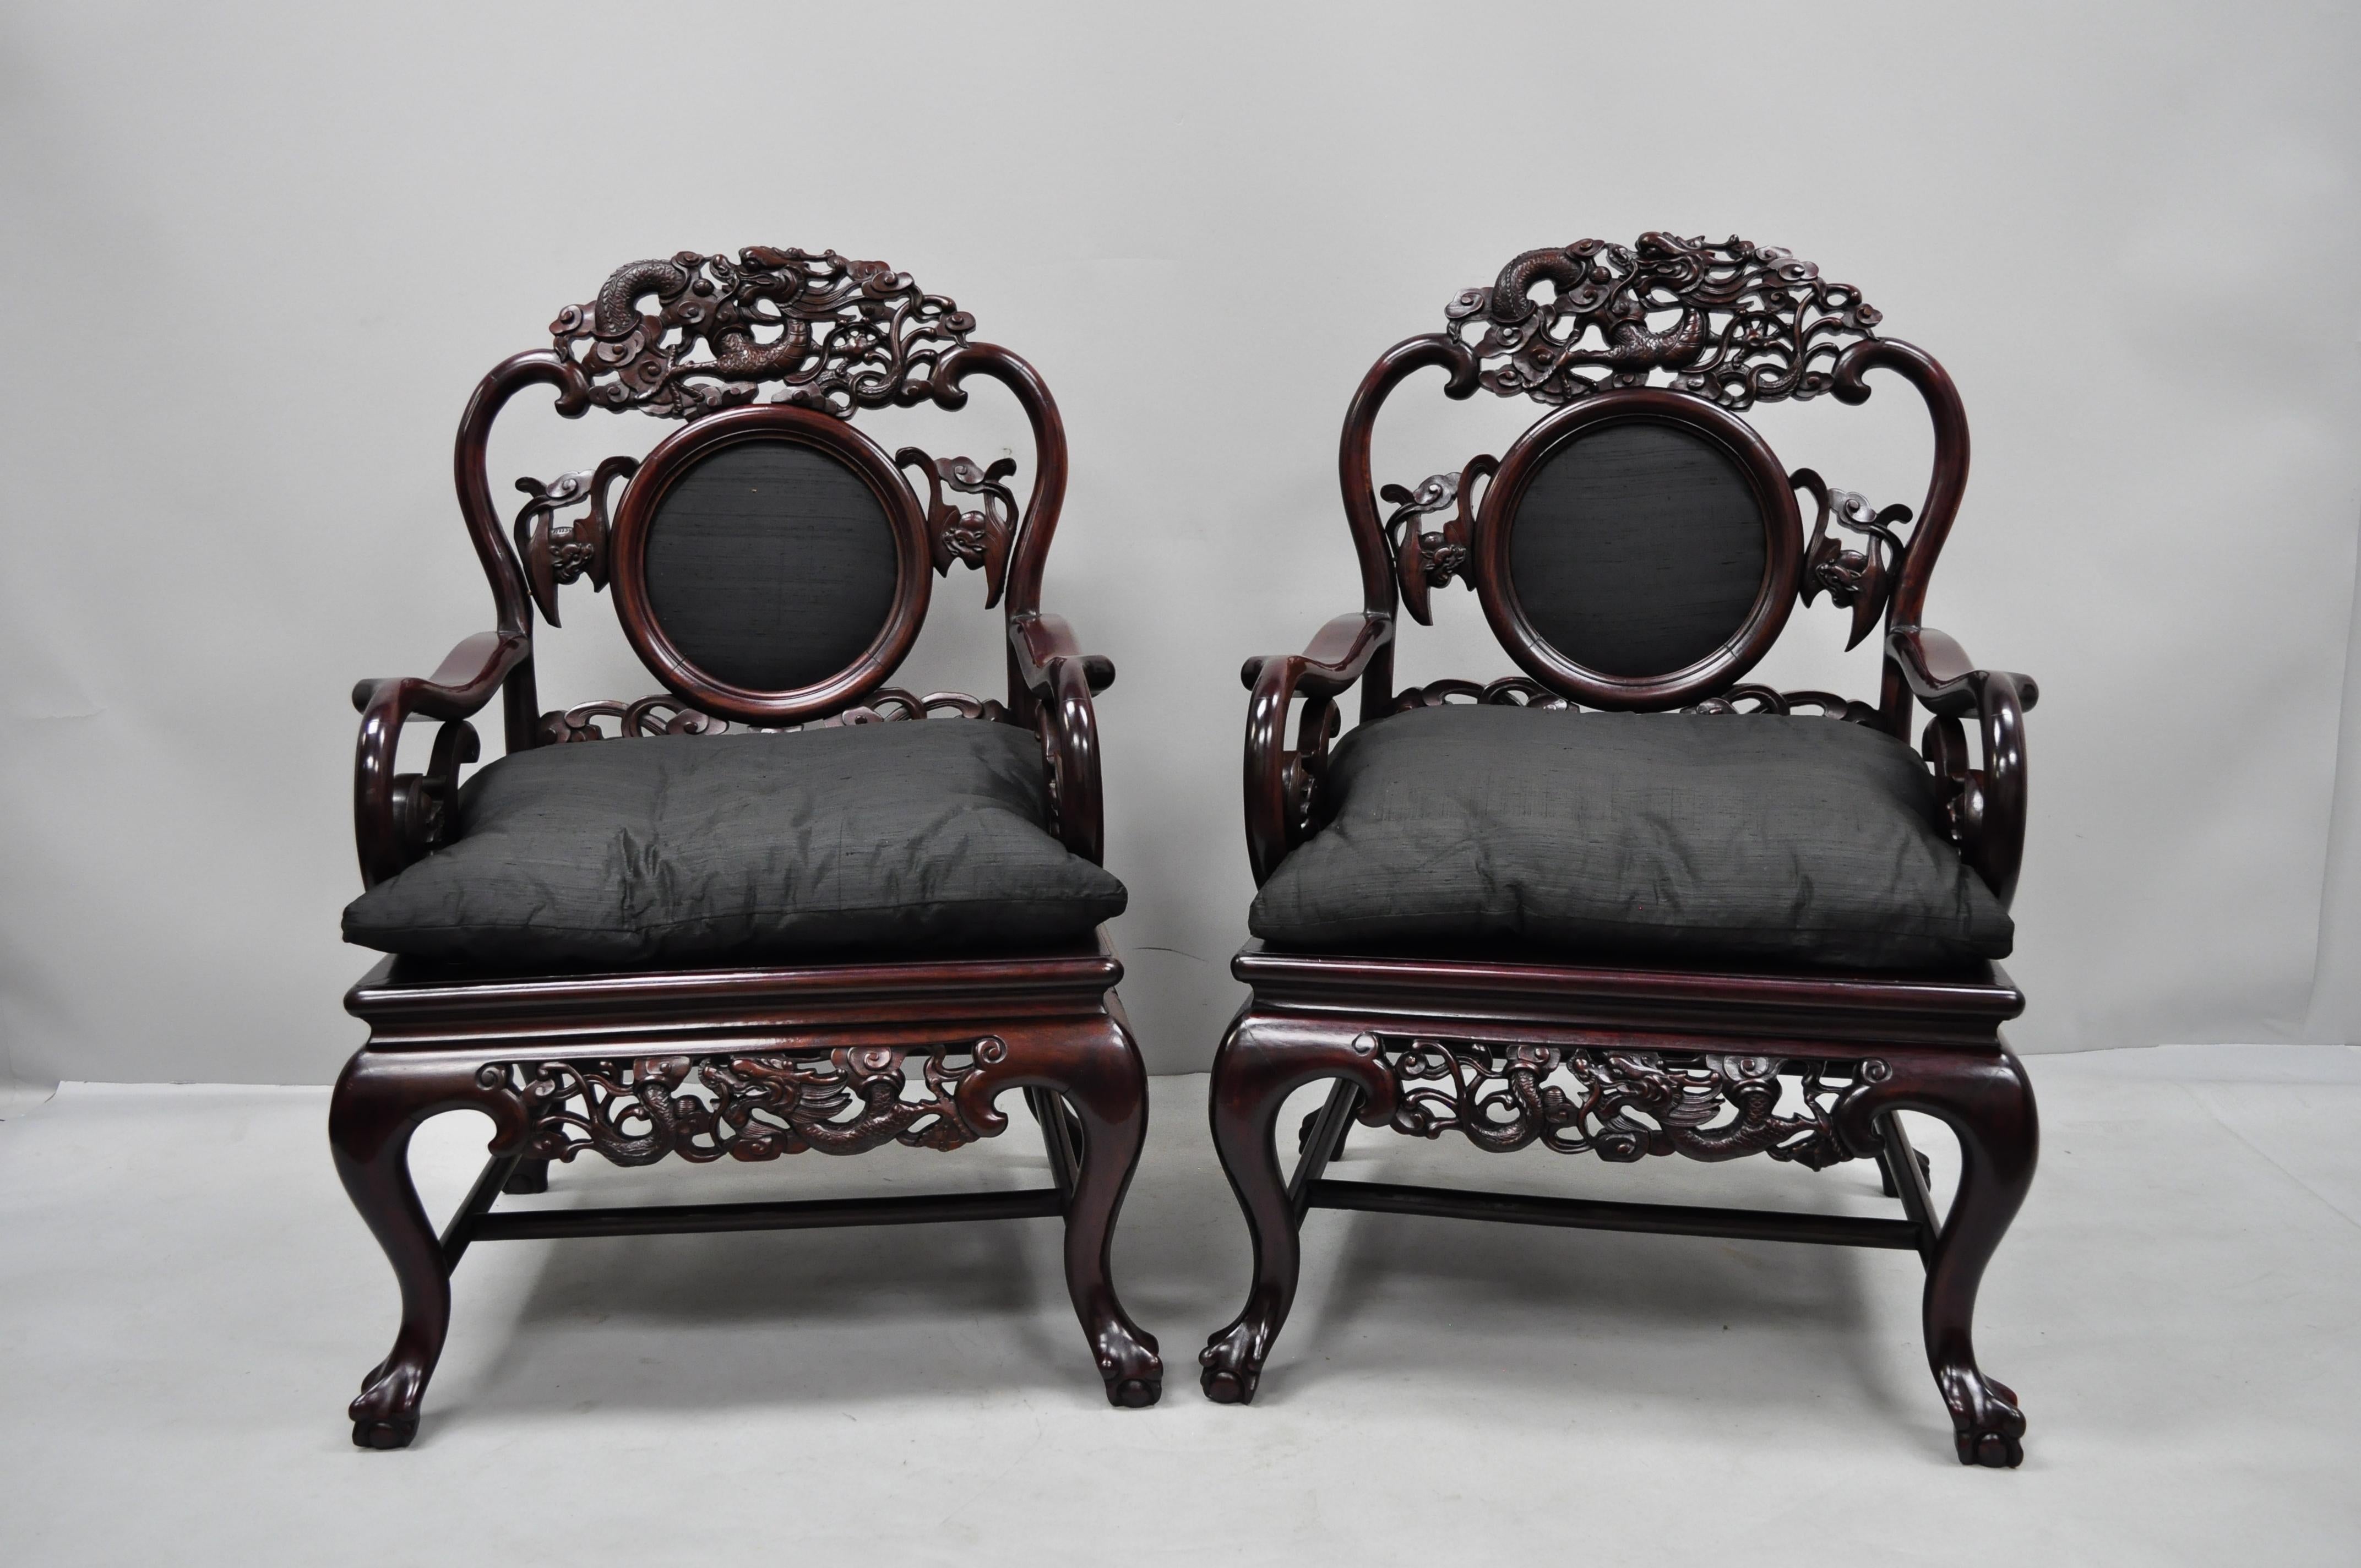 Pair of vintage oriental dragon carved rosewood lounge throne armchairs. Items feature upholstered backrest and loose cushions, dragon carved top rail and lower rail, solid heavy wood construction, circa late 20th century. Measurements: 37